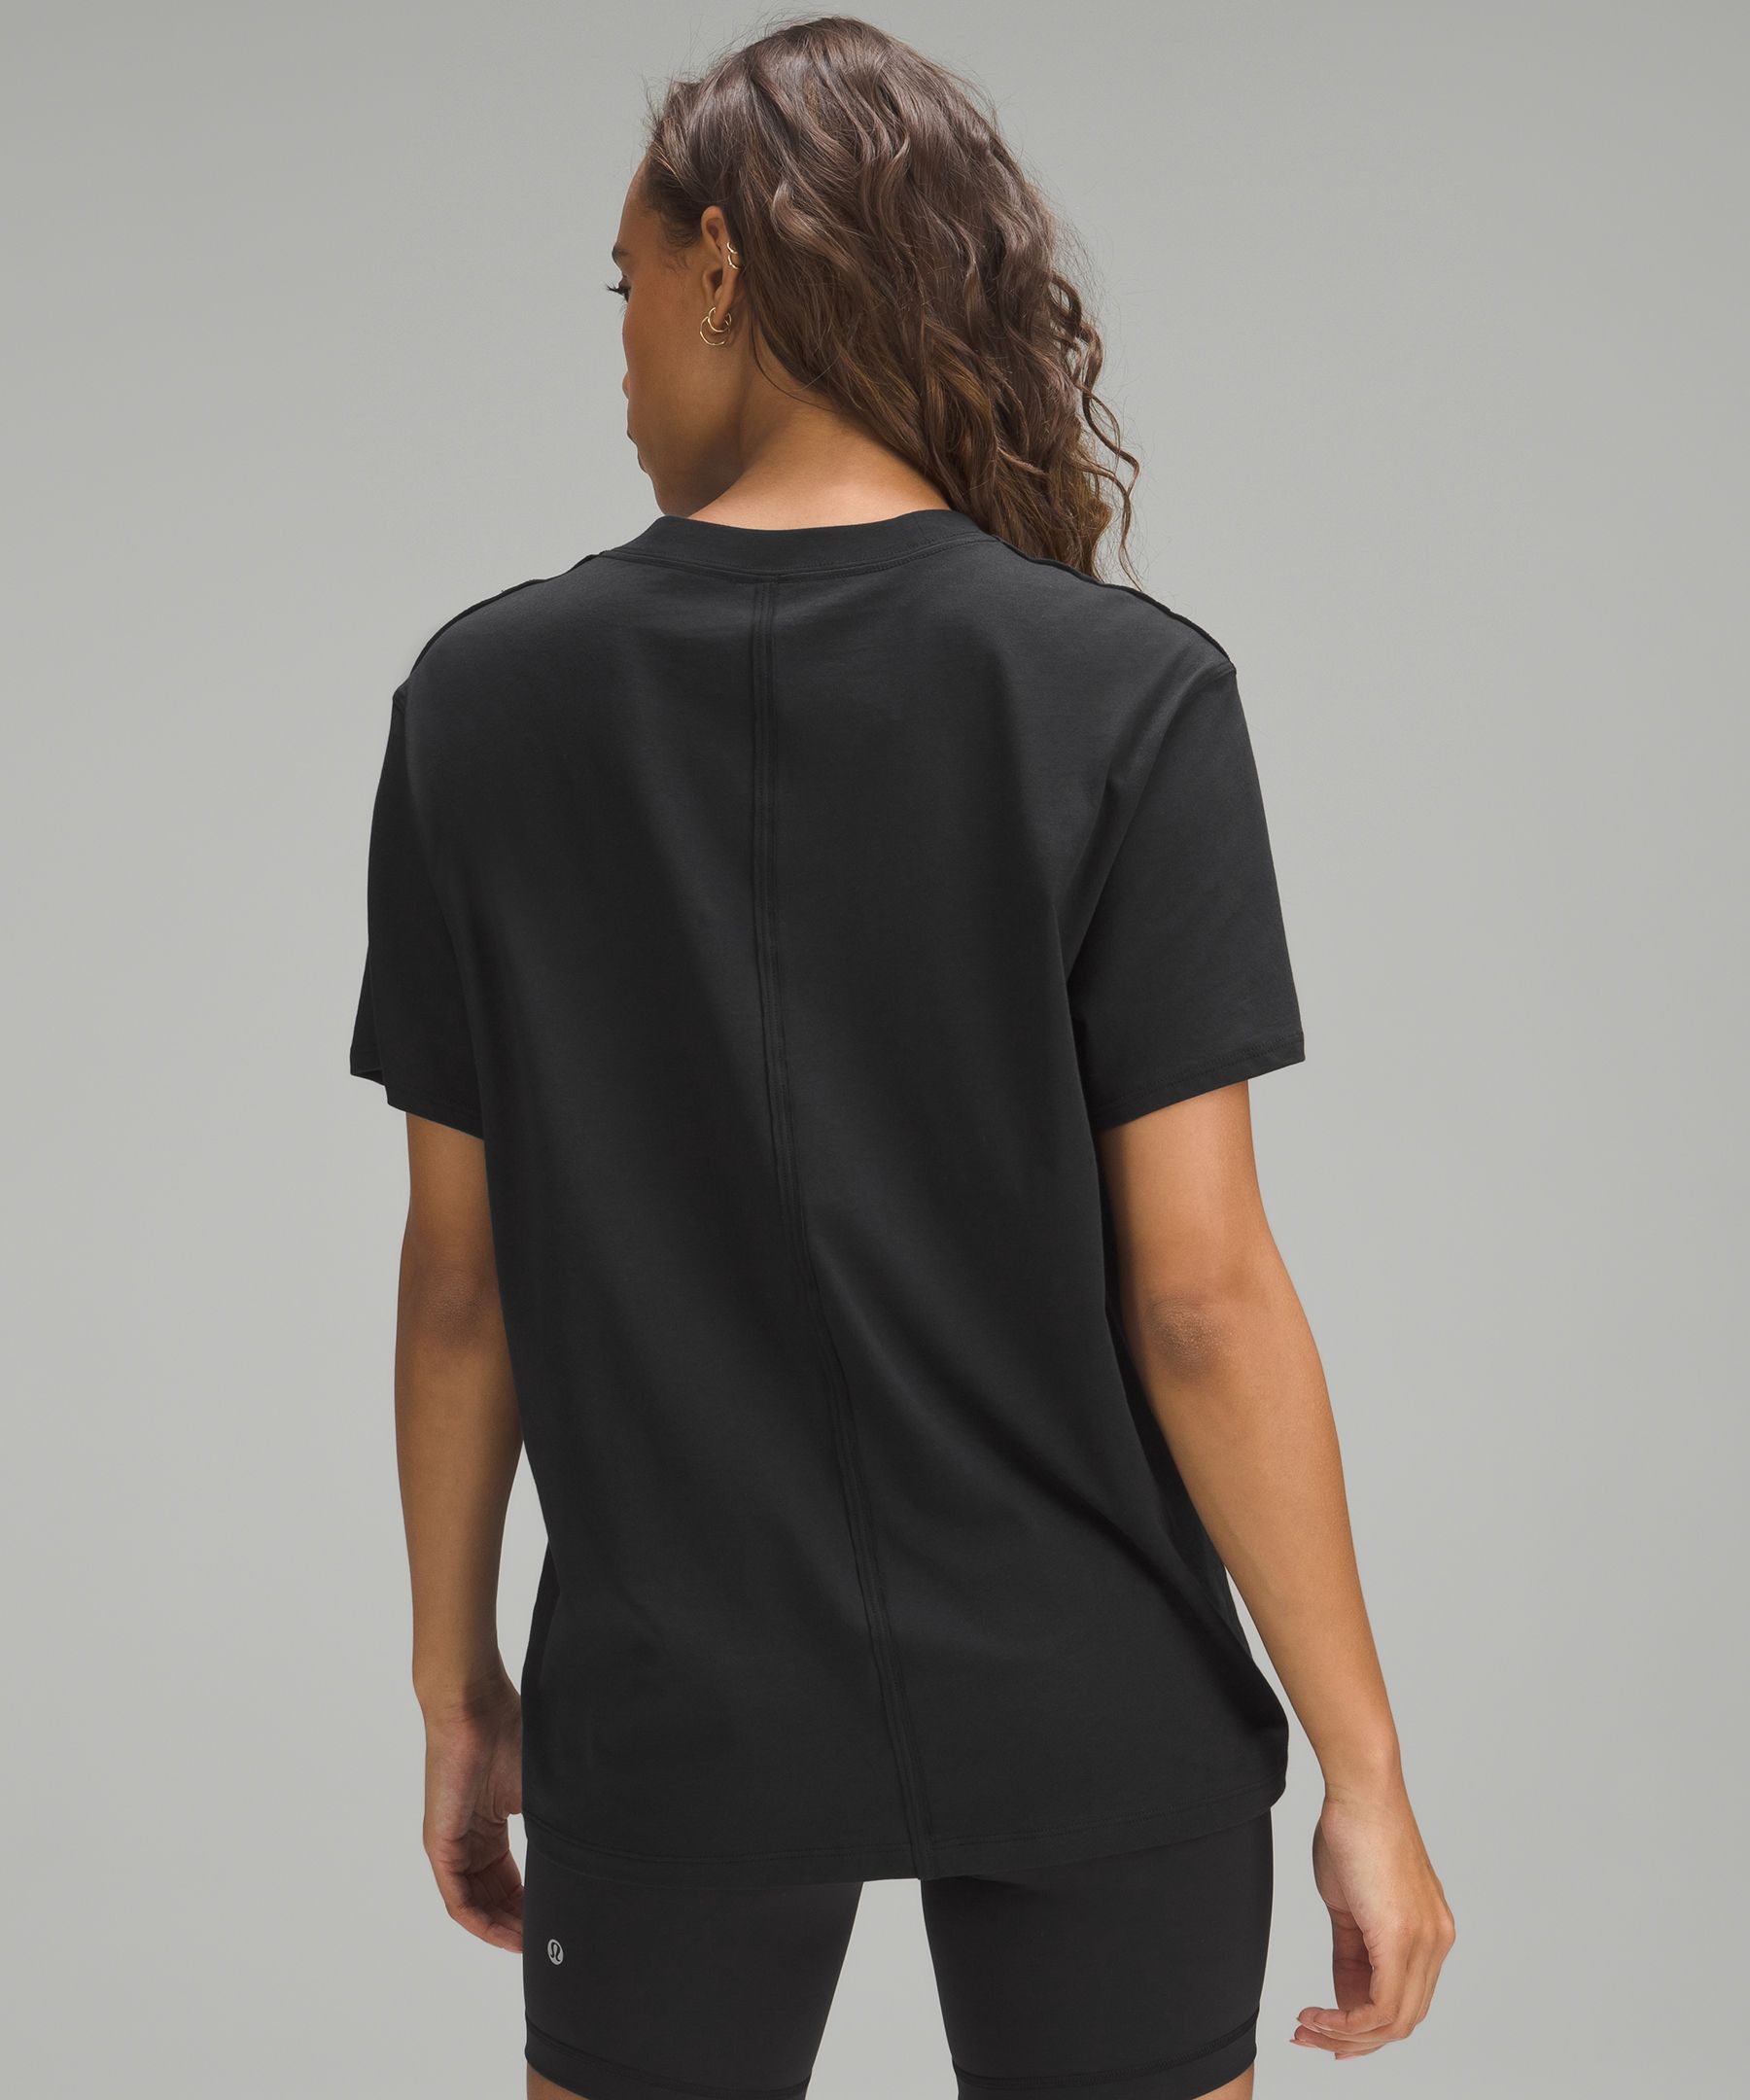 Lululemon All Yours Cotton T-Shirt. 4